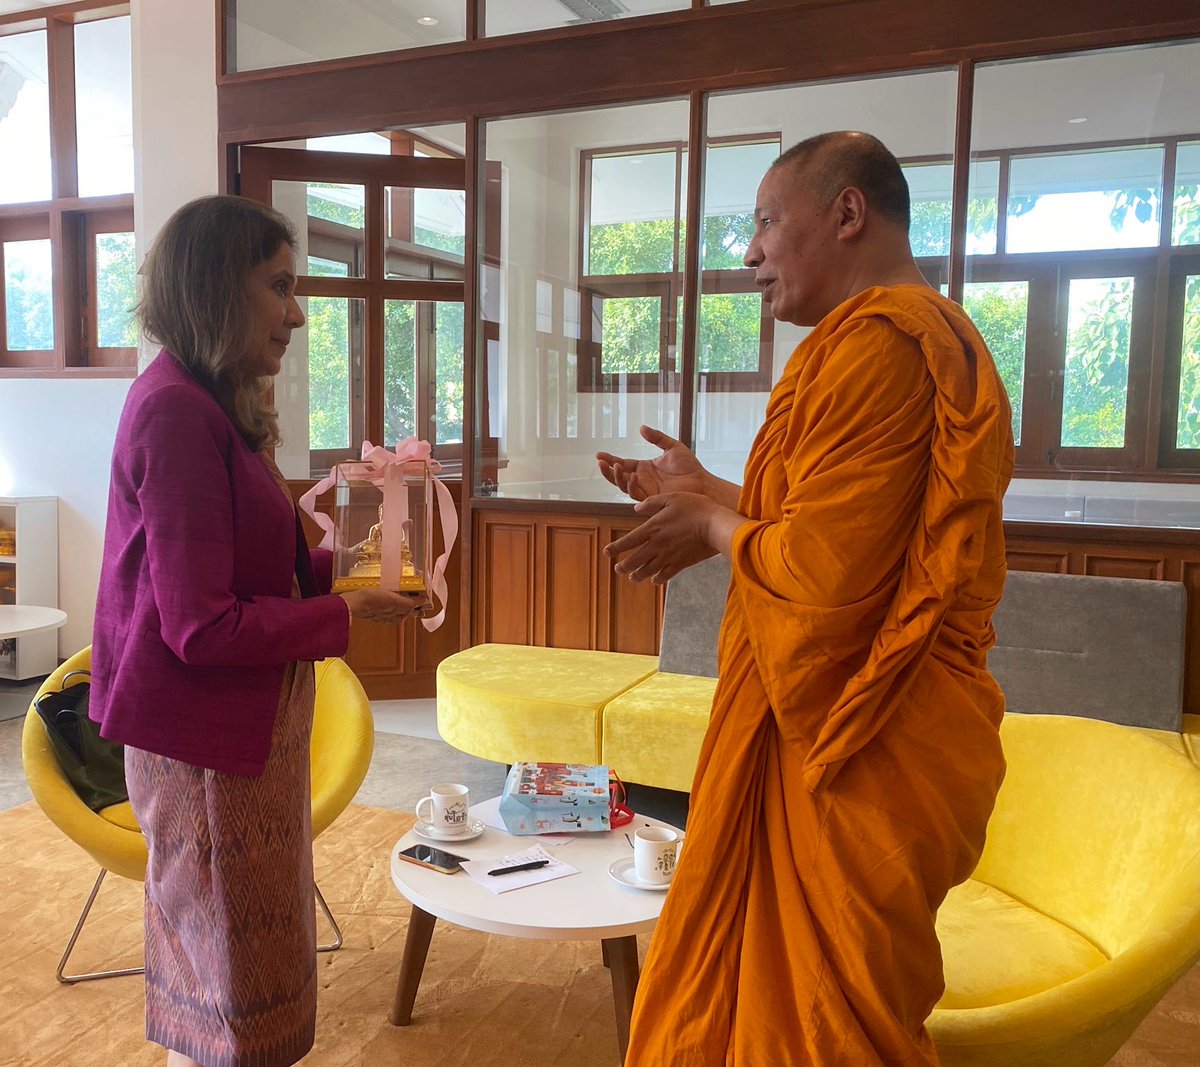 Most Ven. Phra Anil, my thanks for the farewell. Very admirable how you’ve brought fwd best of both sustainability & sufficiency philosophy to society. Happy about your new project to mobilise funding & volunteer health aid for ppl in need in Thimphu 🇧🇹 thru Siriraj Hospital.